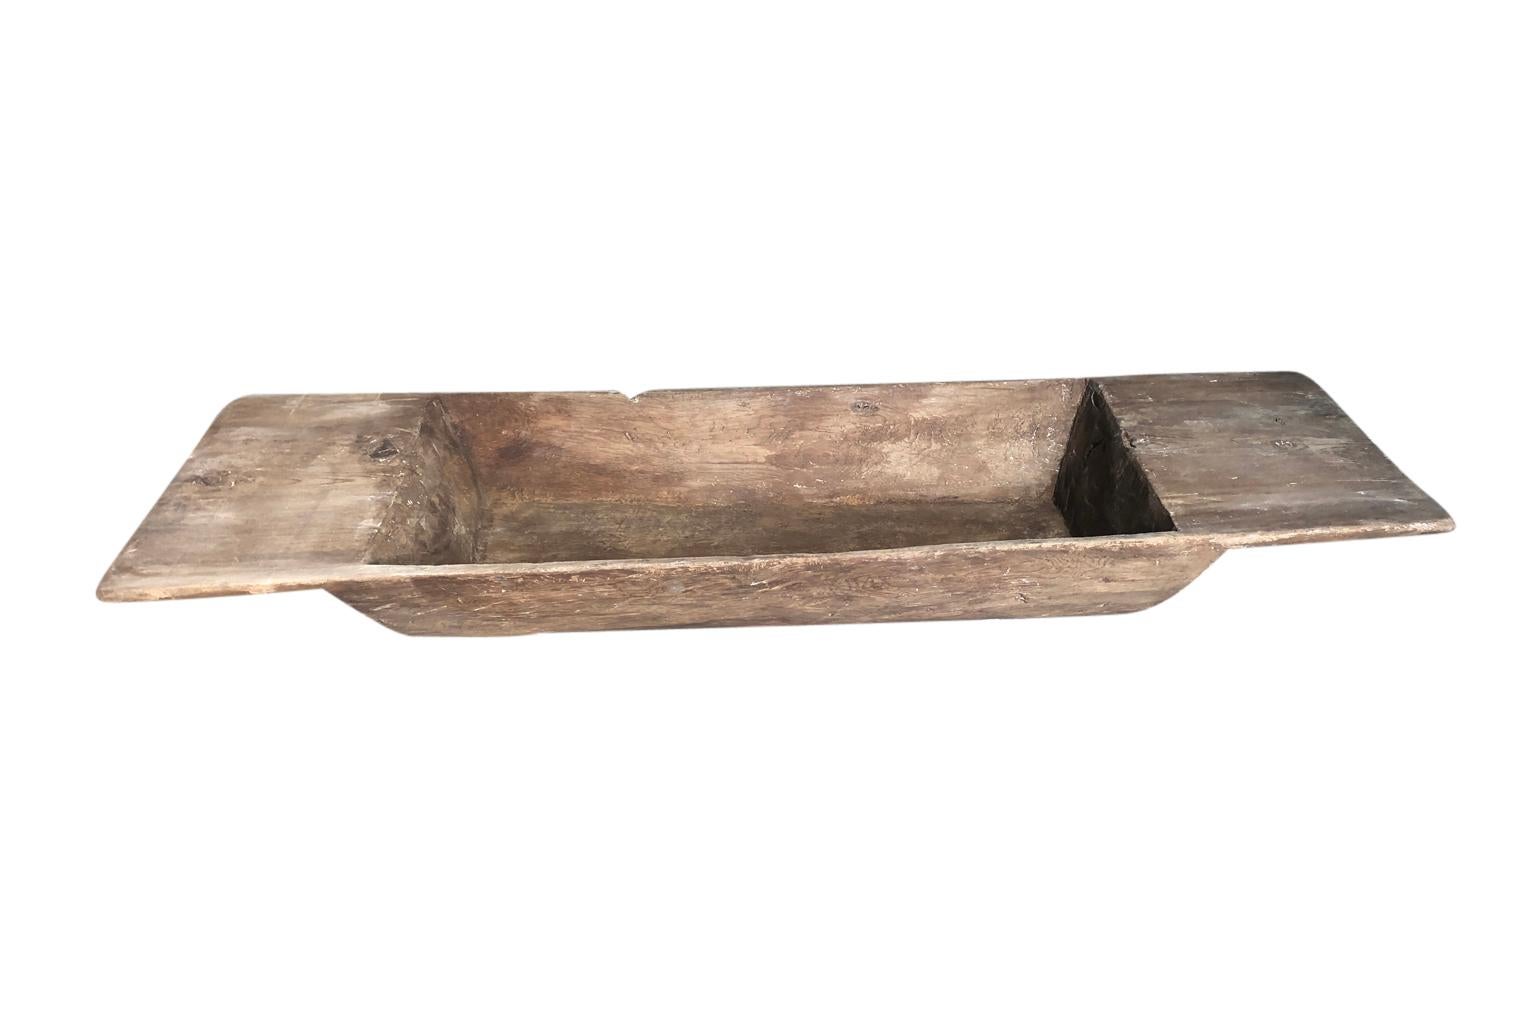 A fantastic very large scale 18th century Spanish dough bowl - or trough, carved from a single tree trunk. Perfect by a fireplace to house kindling, or filled with an assortment of candles. A terrific accent piece.